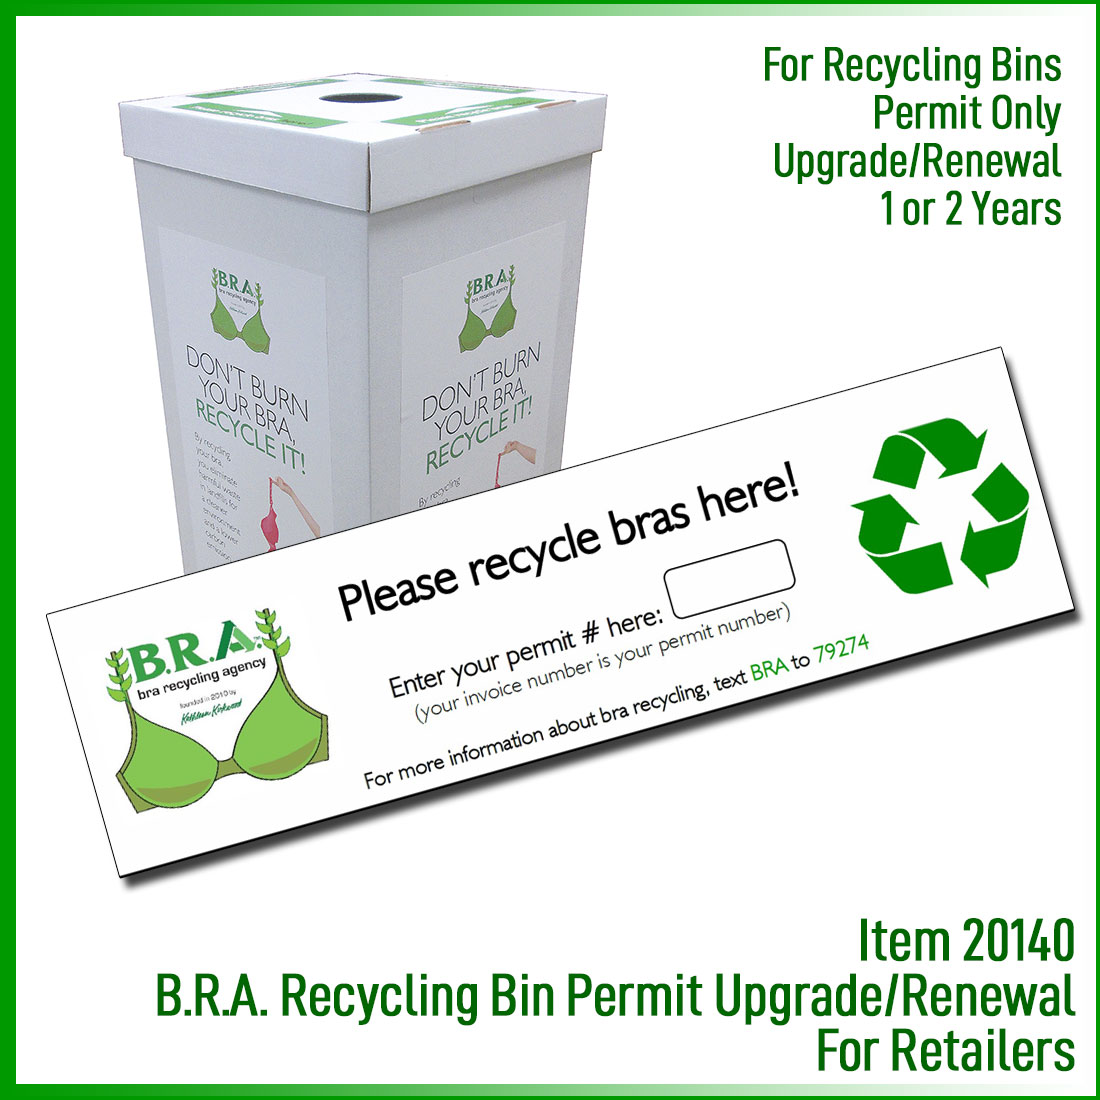 Bra Recycling Services by The Bra Recyclers in Gilbert, AZ - Alignable